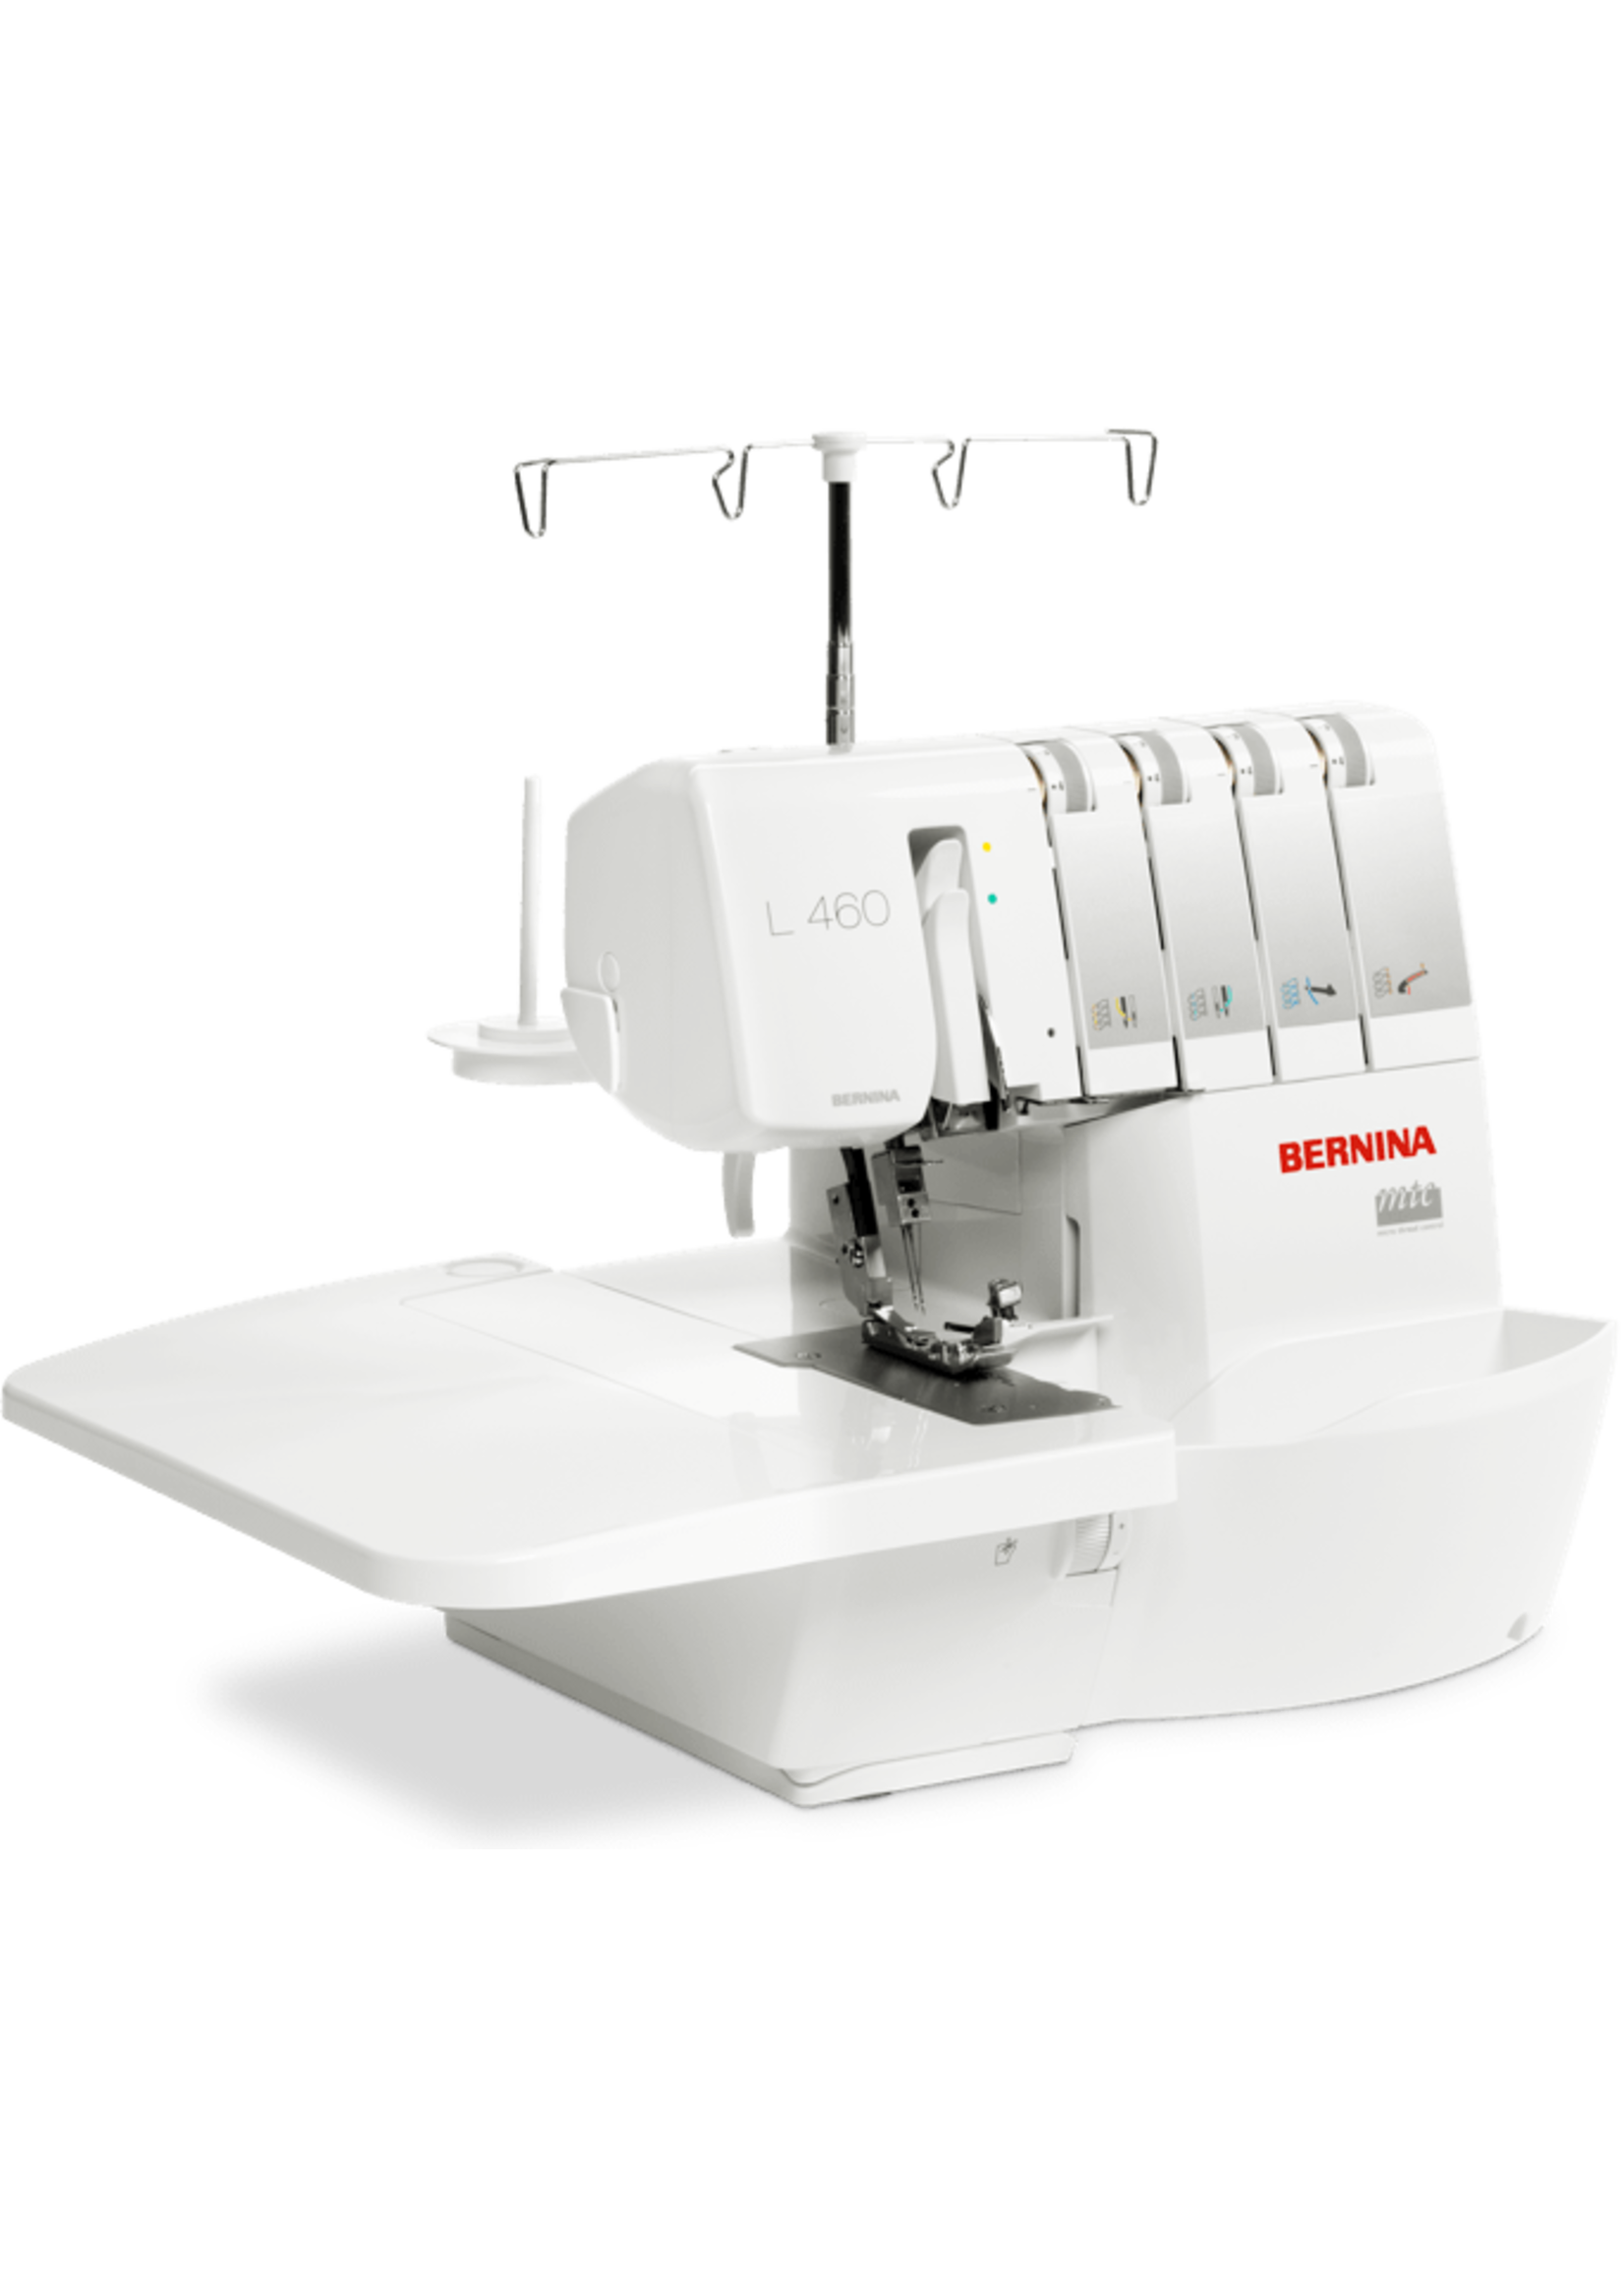 Bernina Bernina L460 Serger - AVAILABLE FOR IN-STORE PURCHASE ONLY